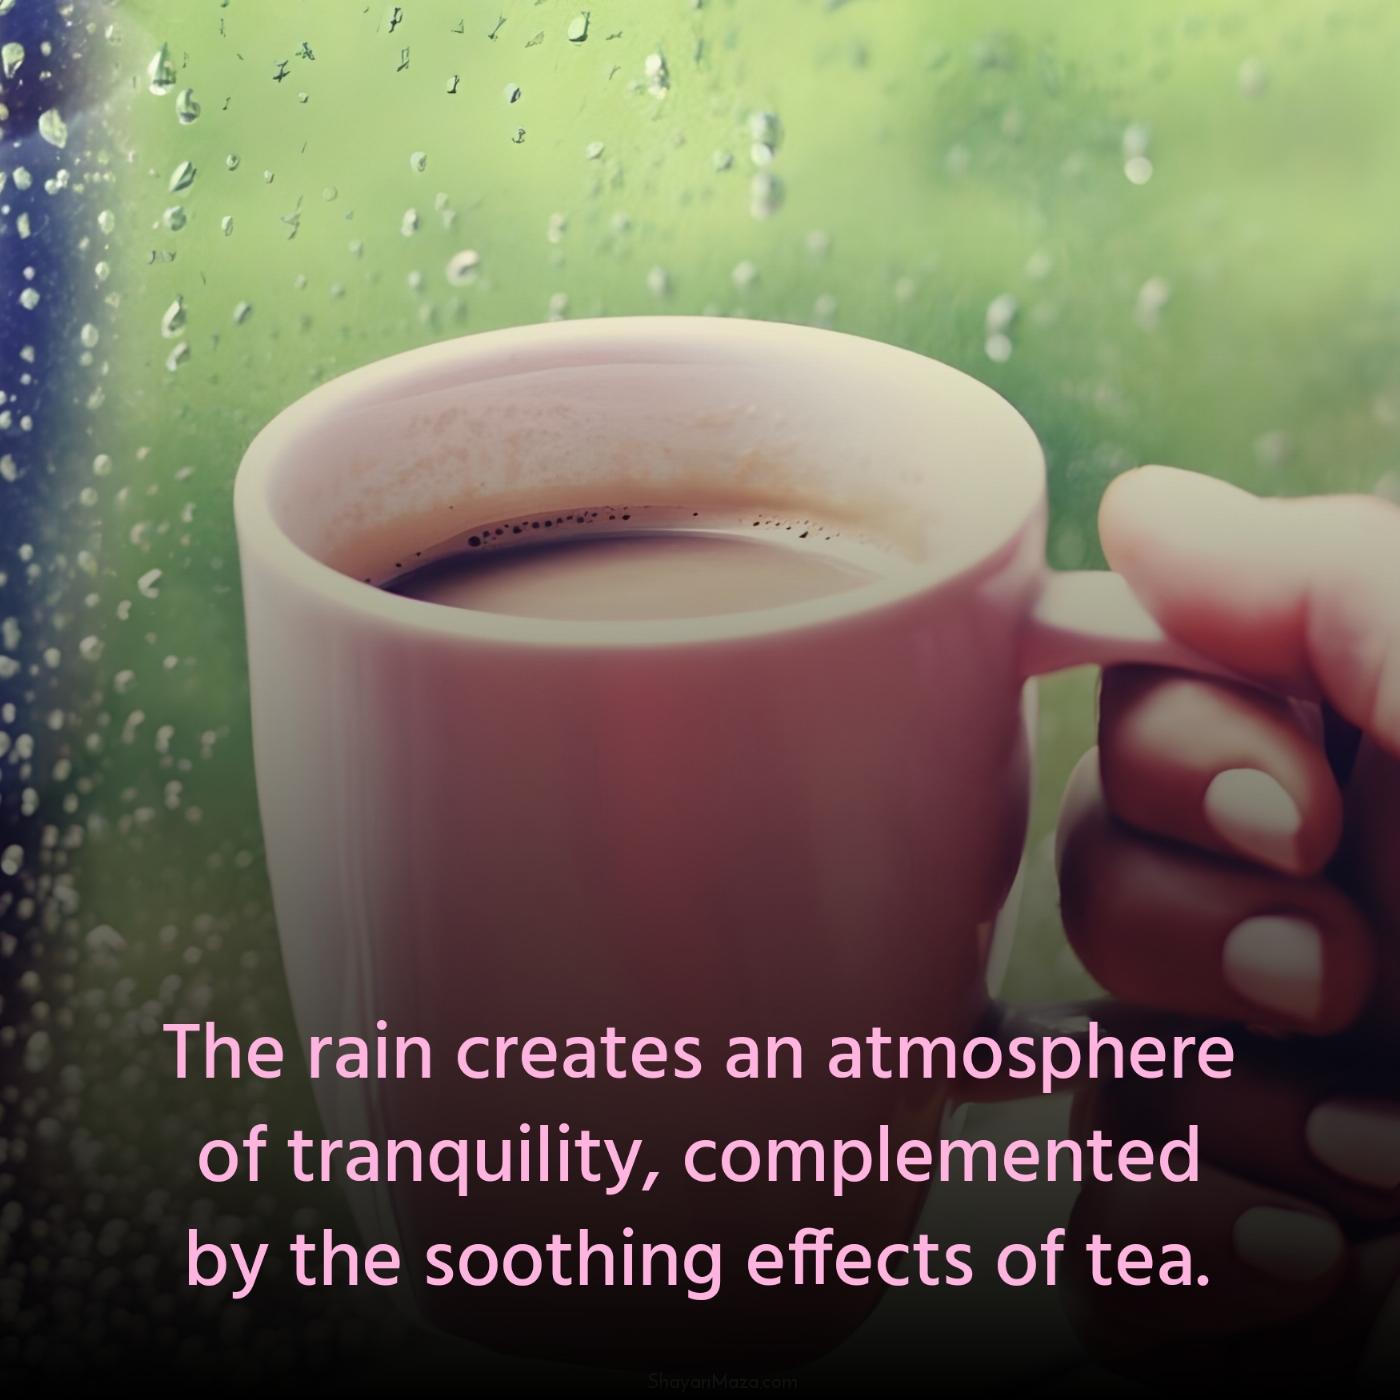 The rain creates an atmosphere of tranquility